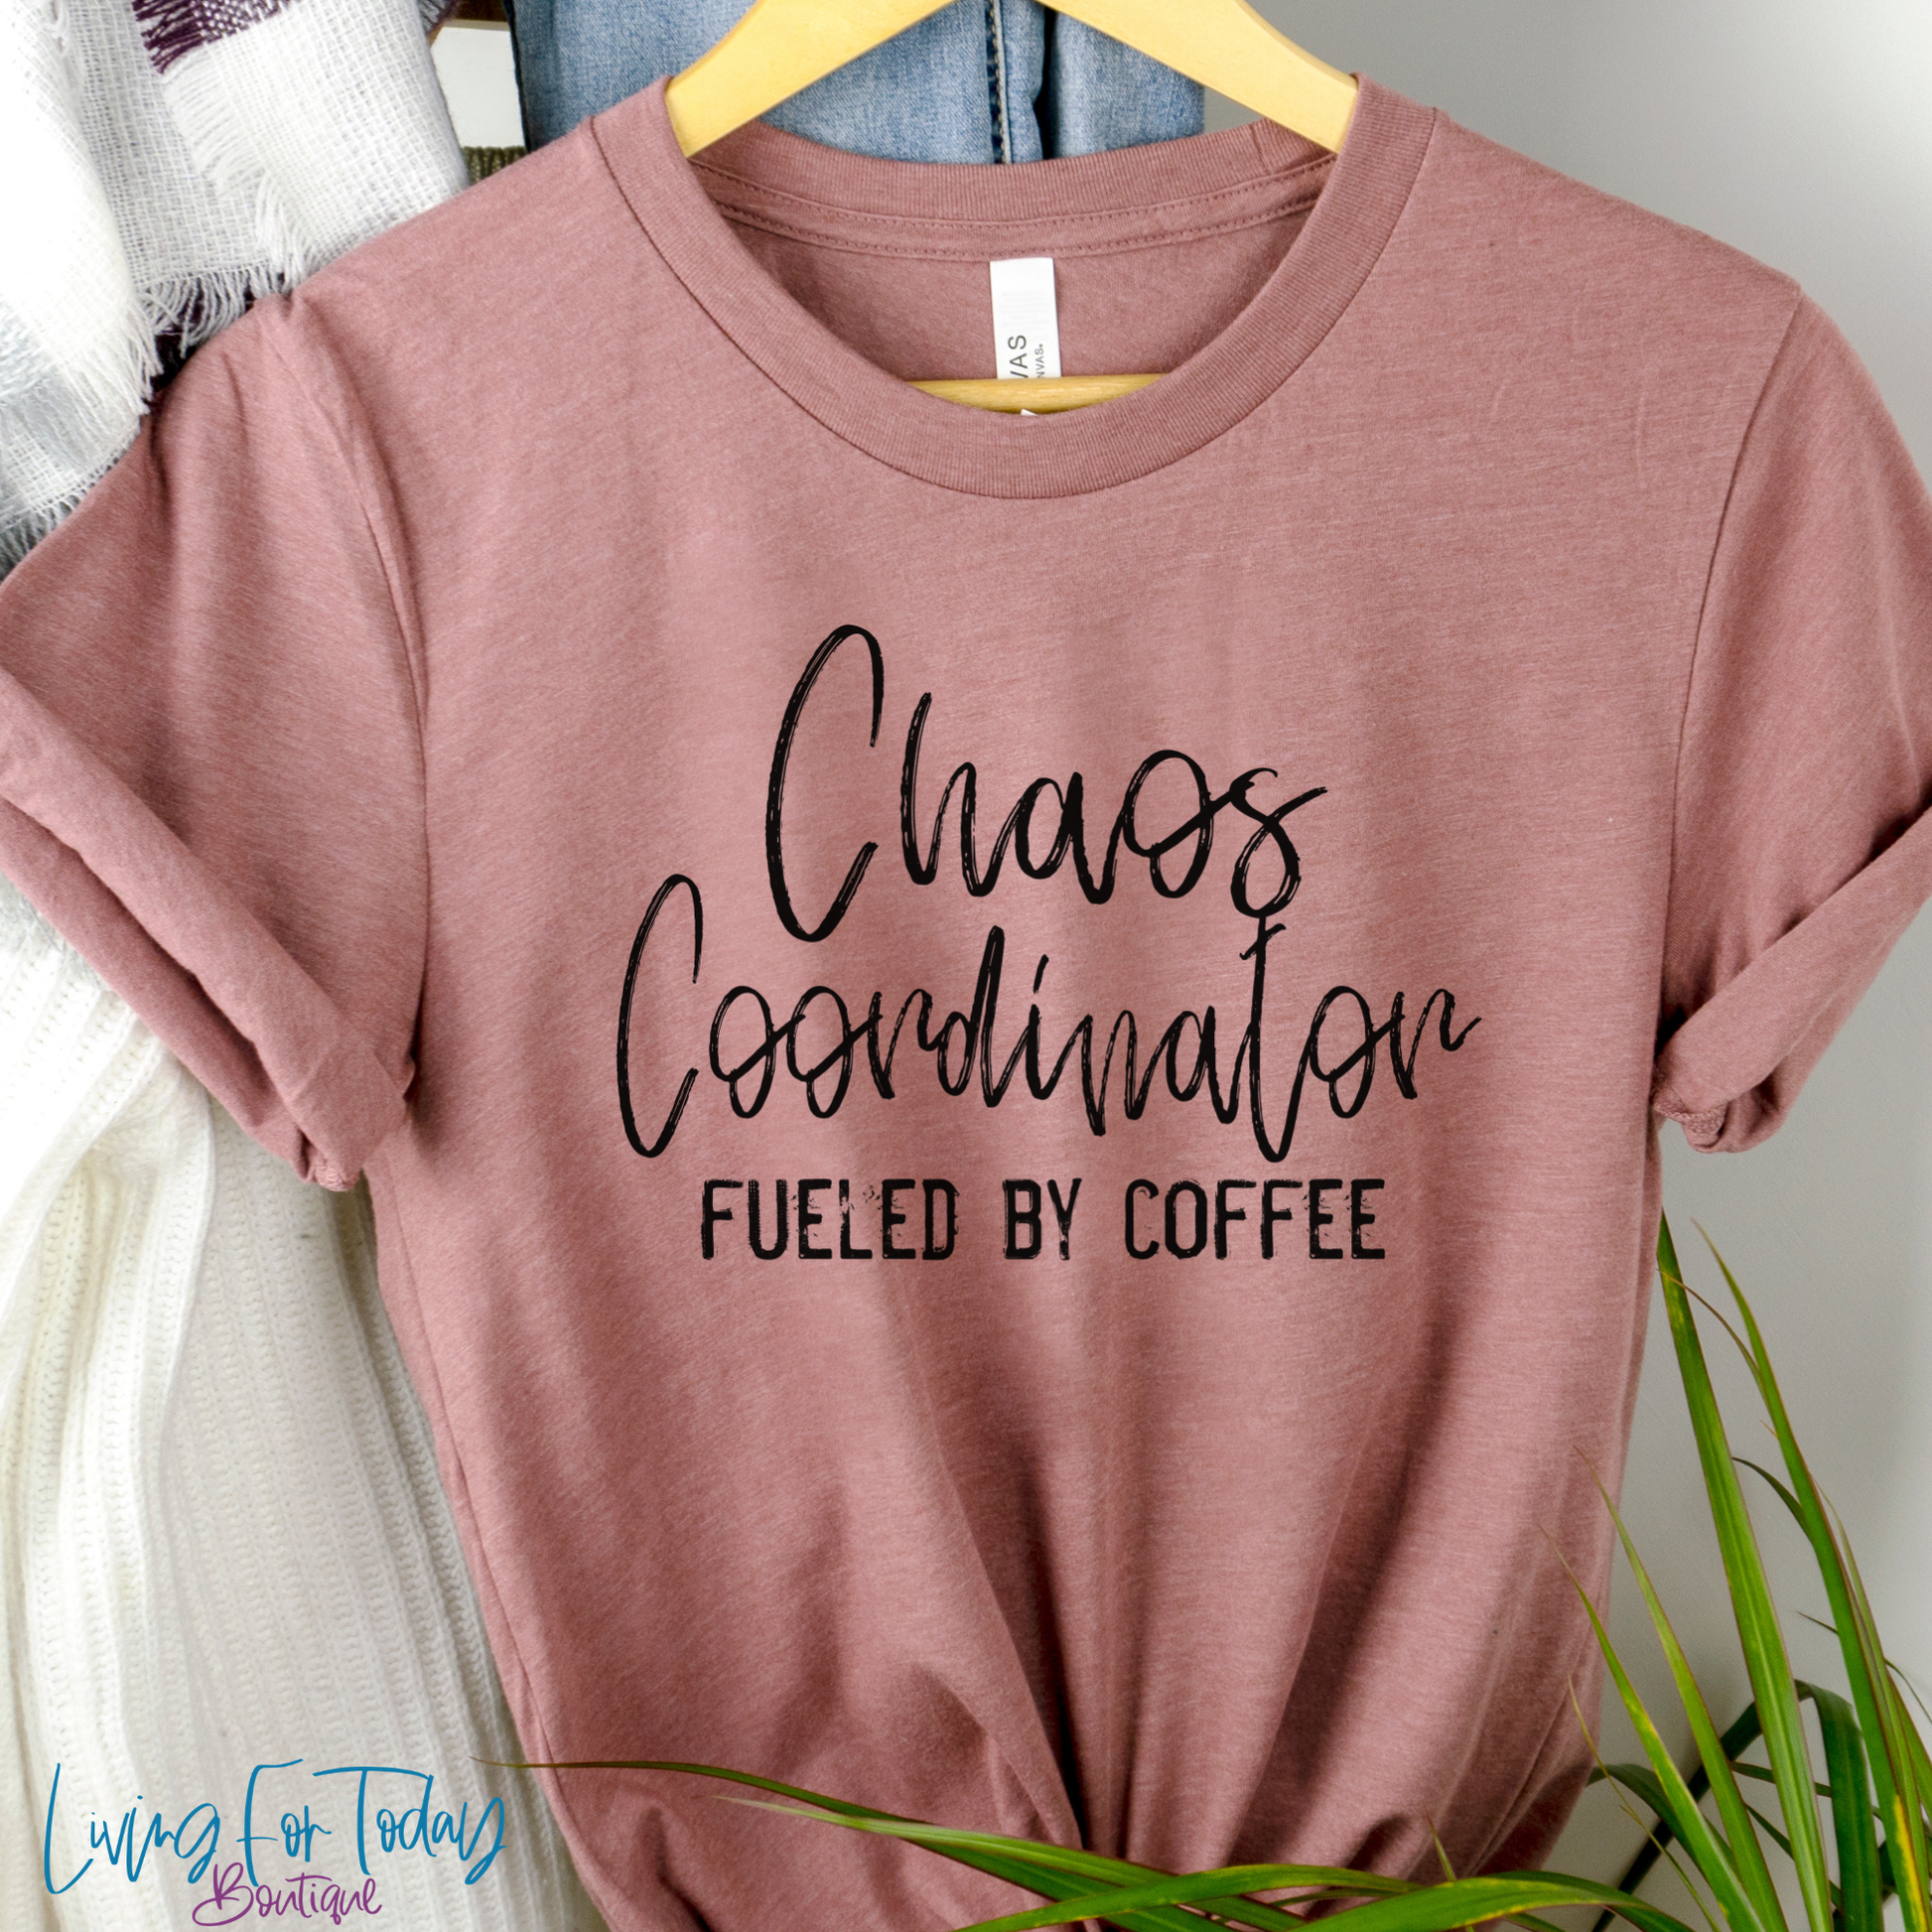 Chaos Coordinator Fueled by Coffee Shirt